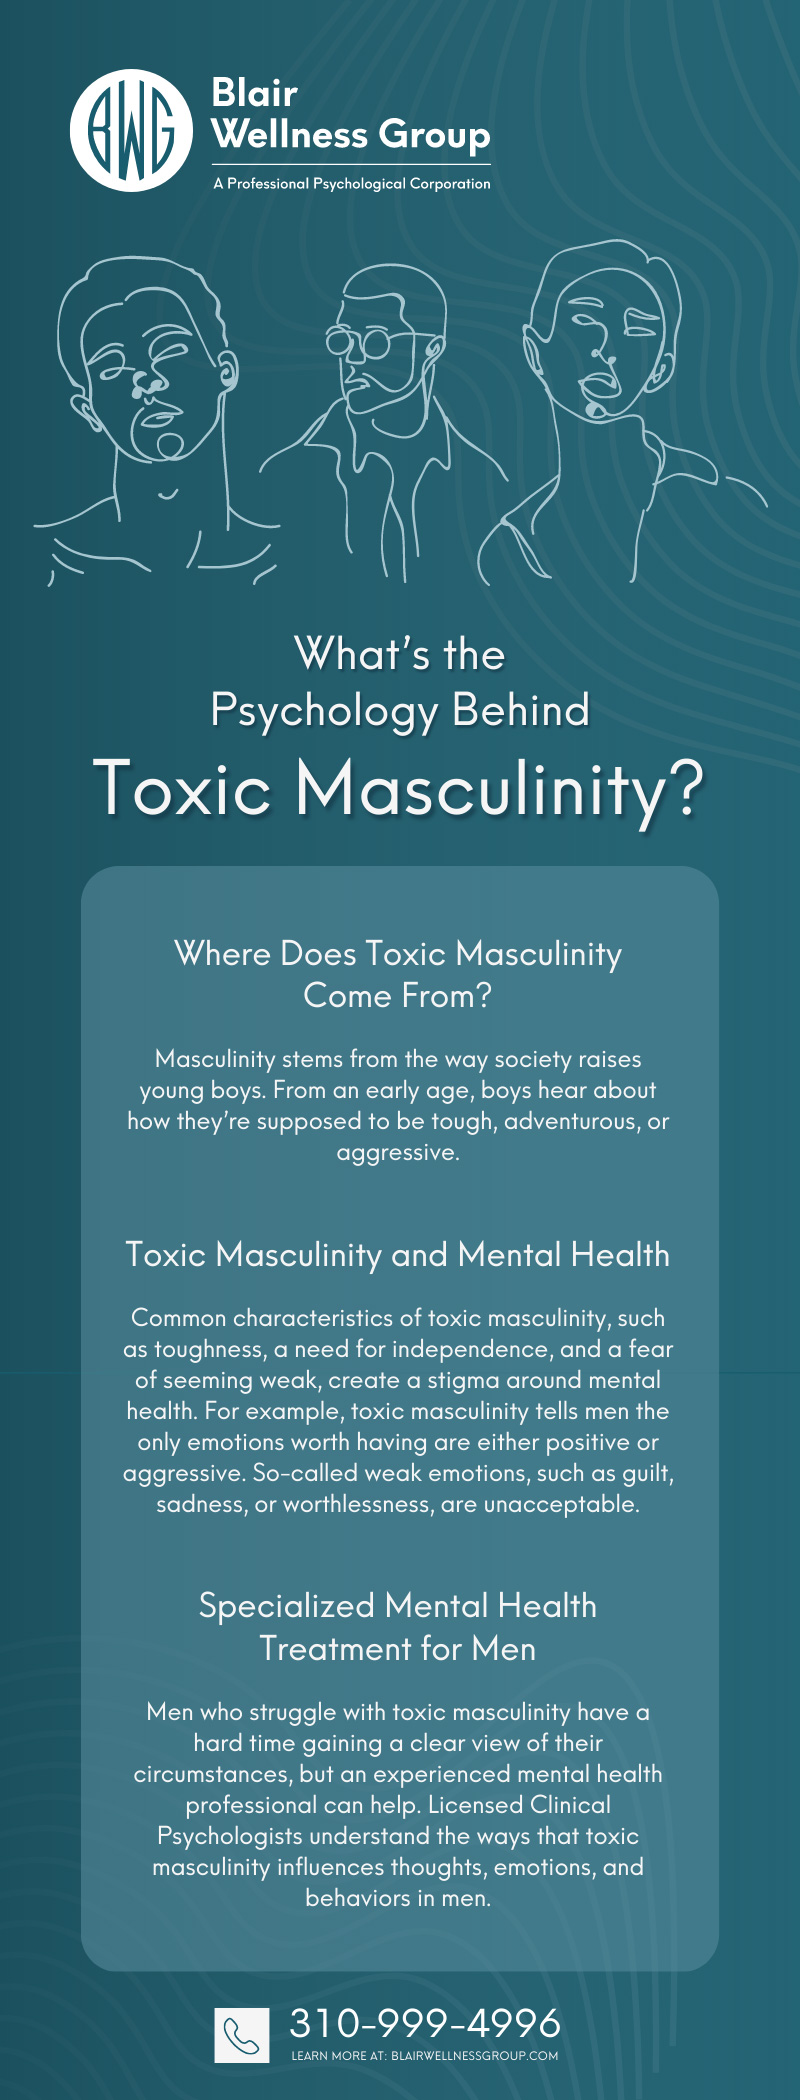 What’s the Psychology Behind Toxic Masculinity?